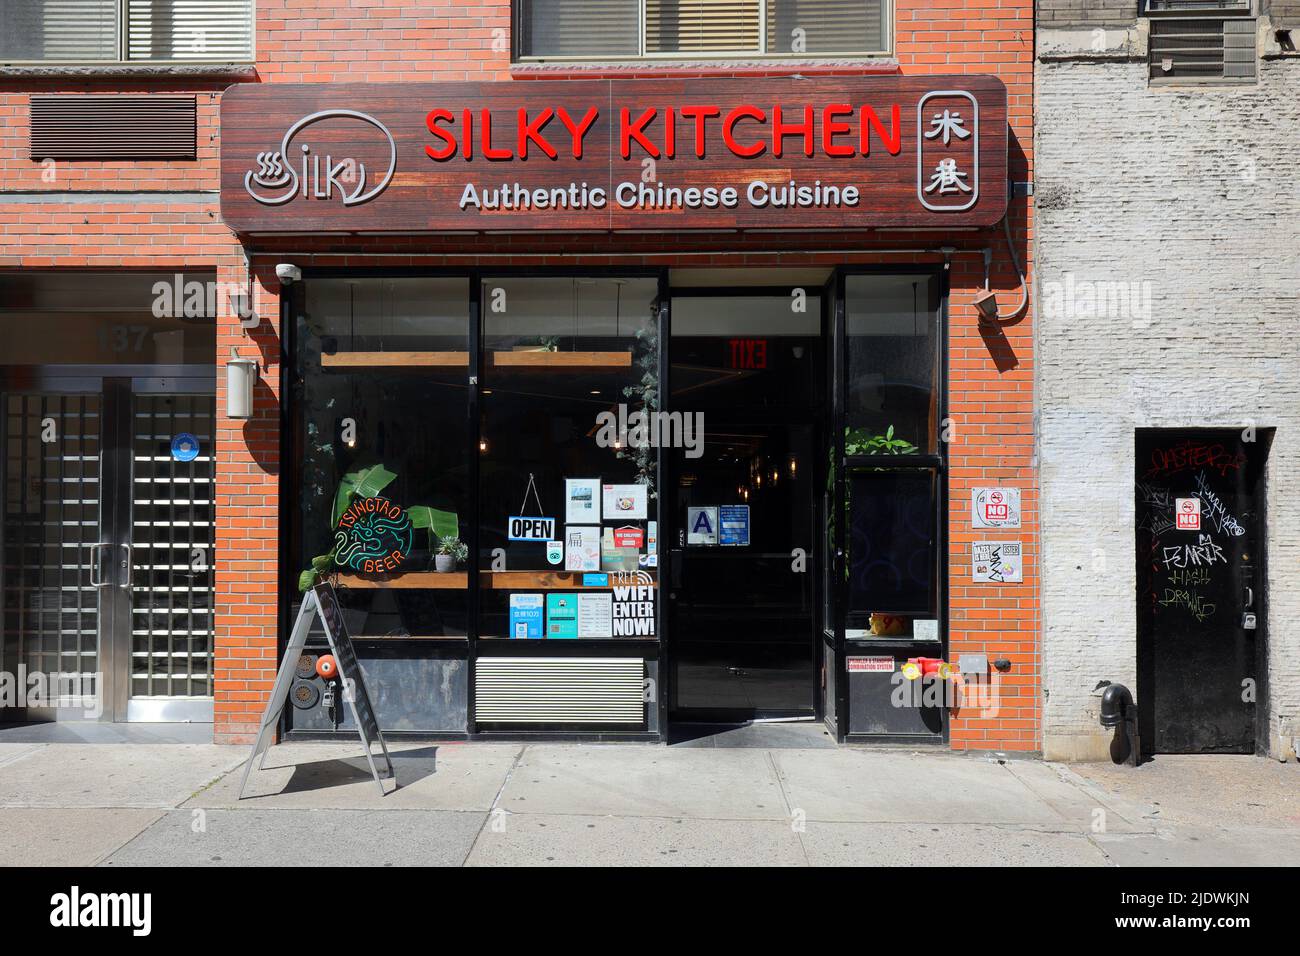 Silky Kitchen, 137 E 13th St, New York, NY. exterior storefront of a Hunan restaurant in the East Village neighborhood in Manhattan. Stock Photo